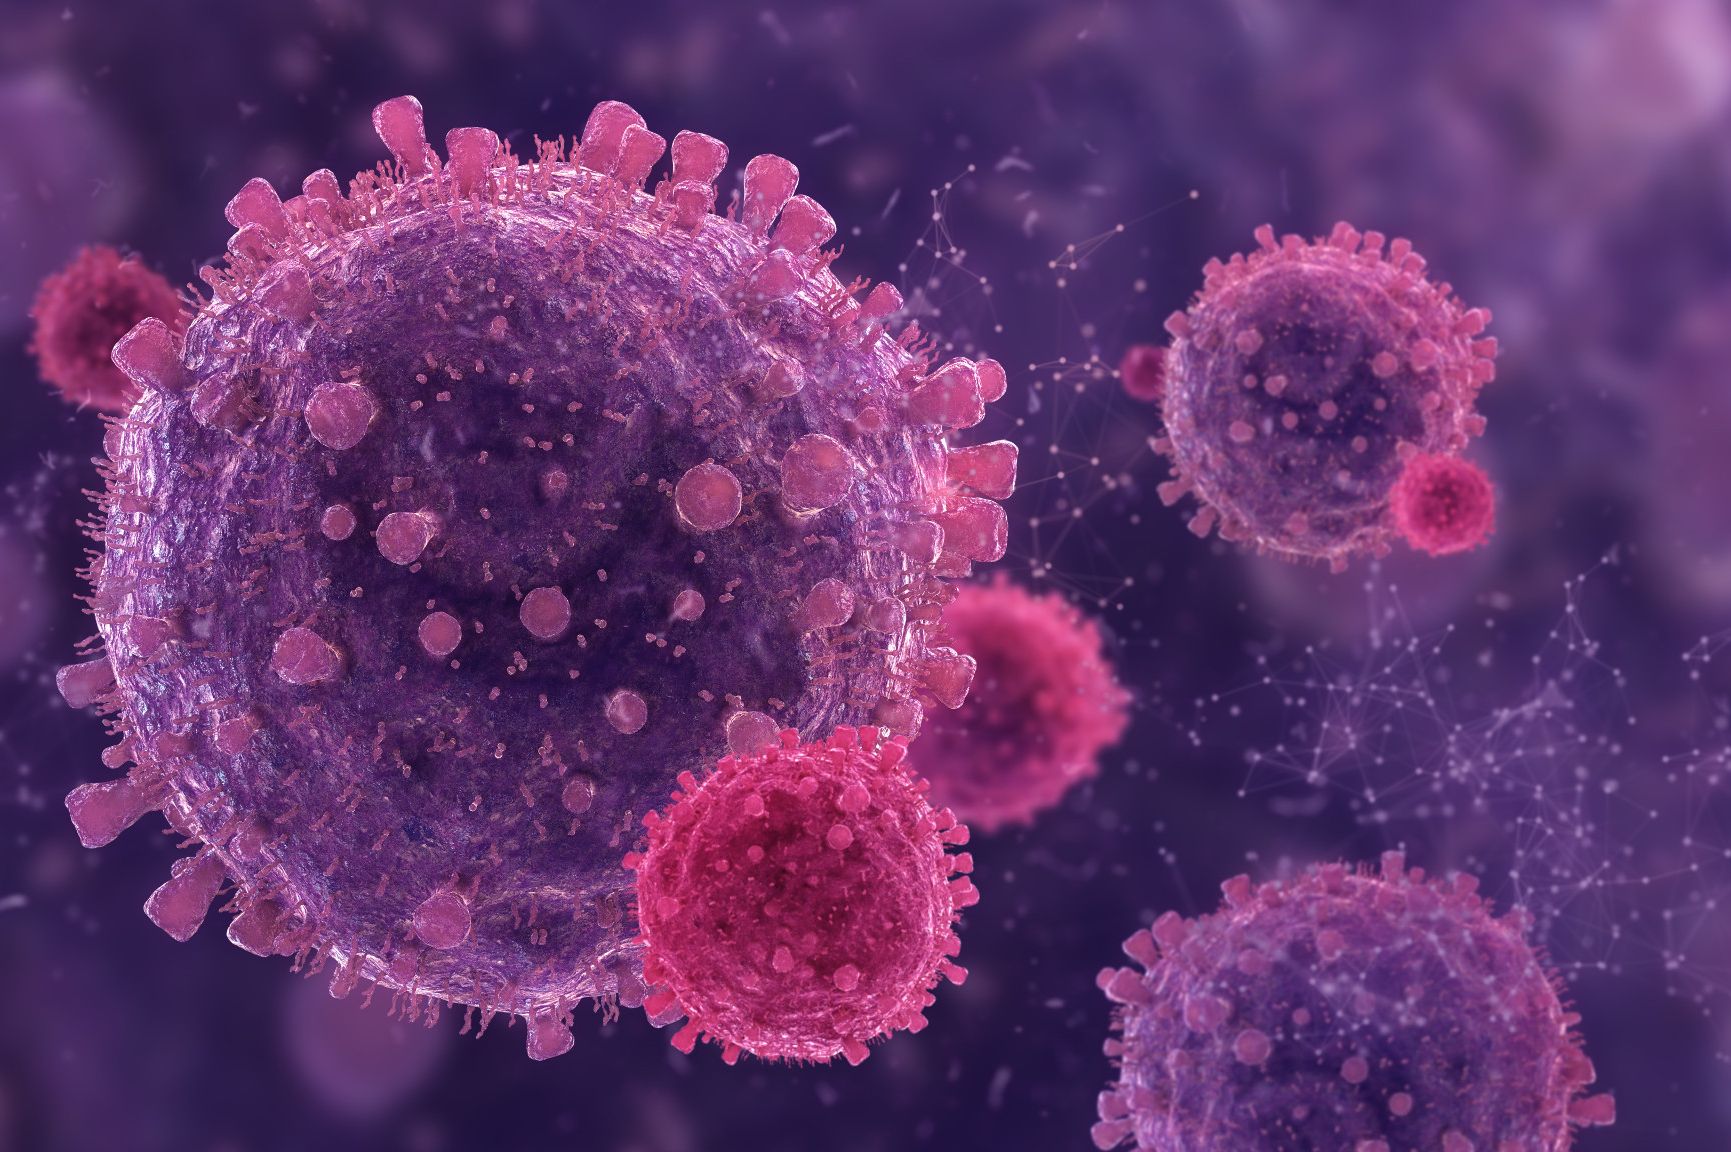 Abstract 3D render of of virus cells. Shallow depth of field.